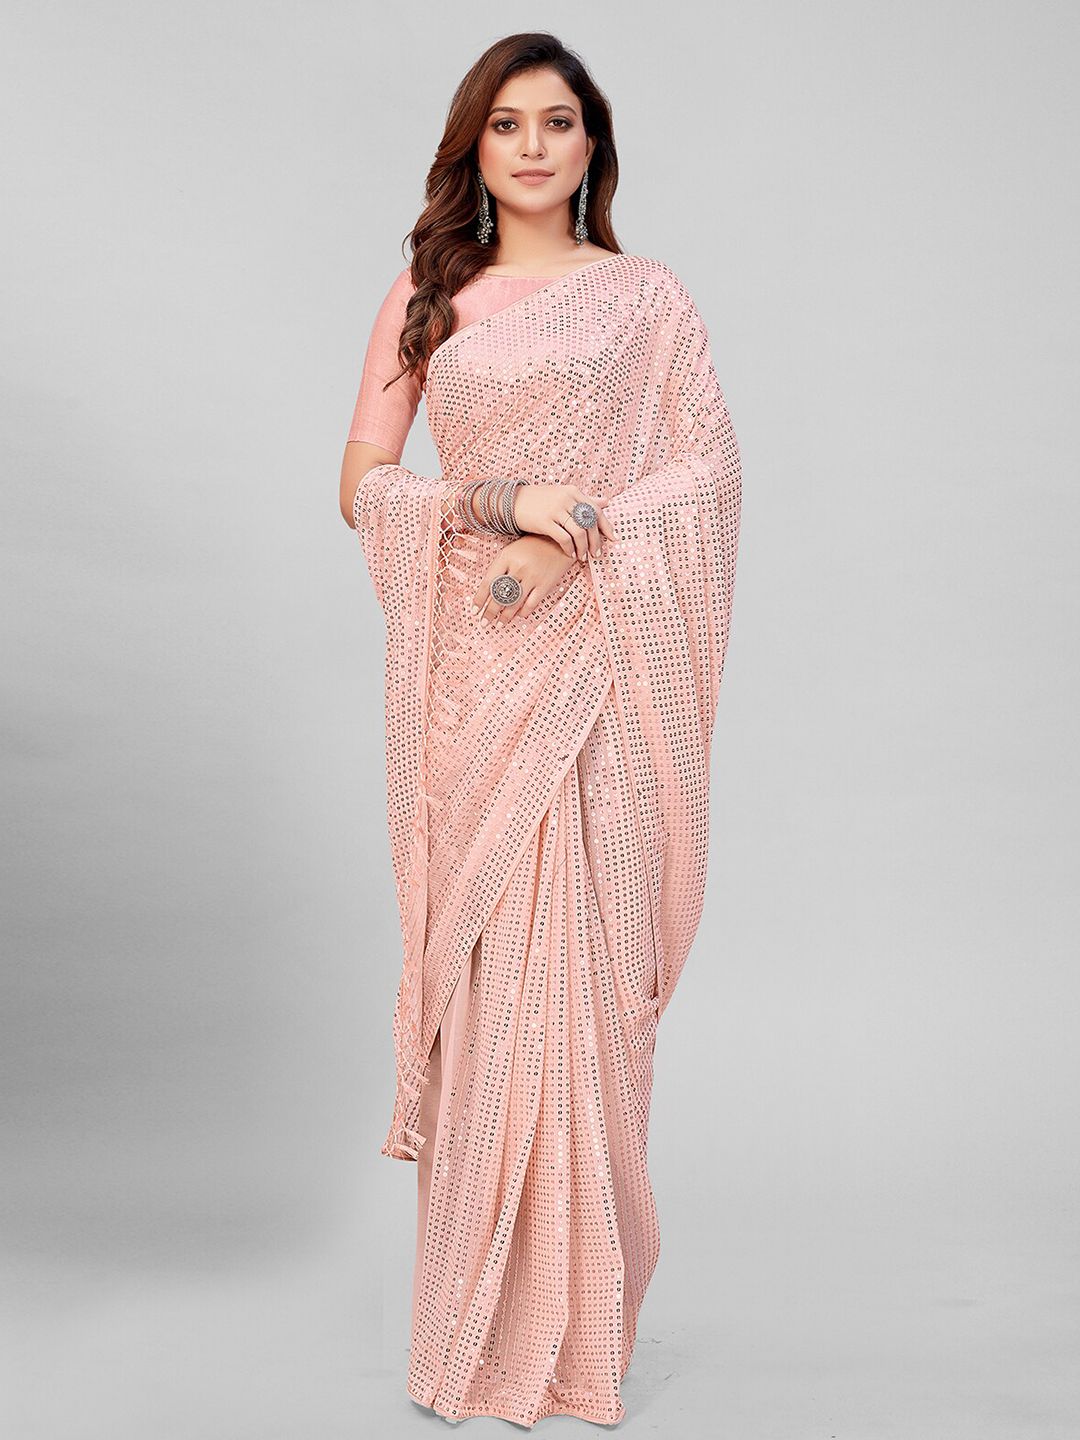 KALINI Embellished Sequinned Pure Georgette Saree Price in India